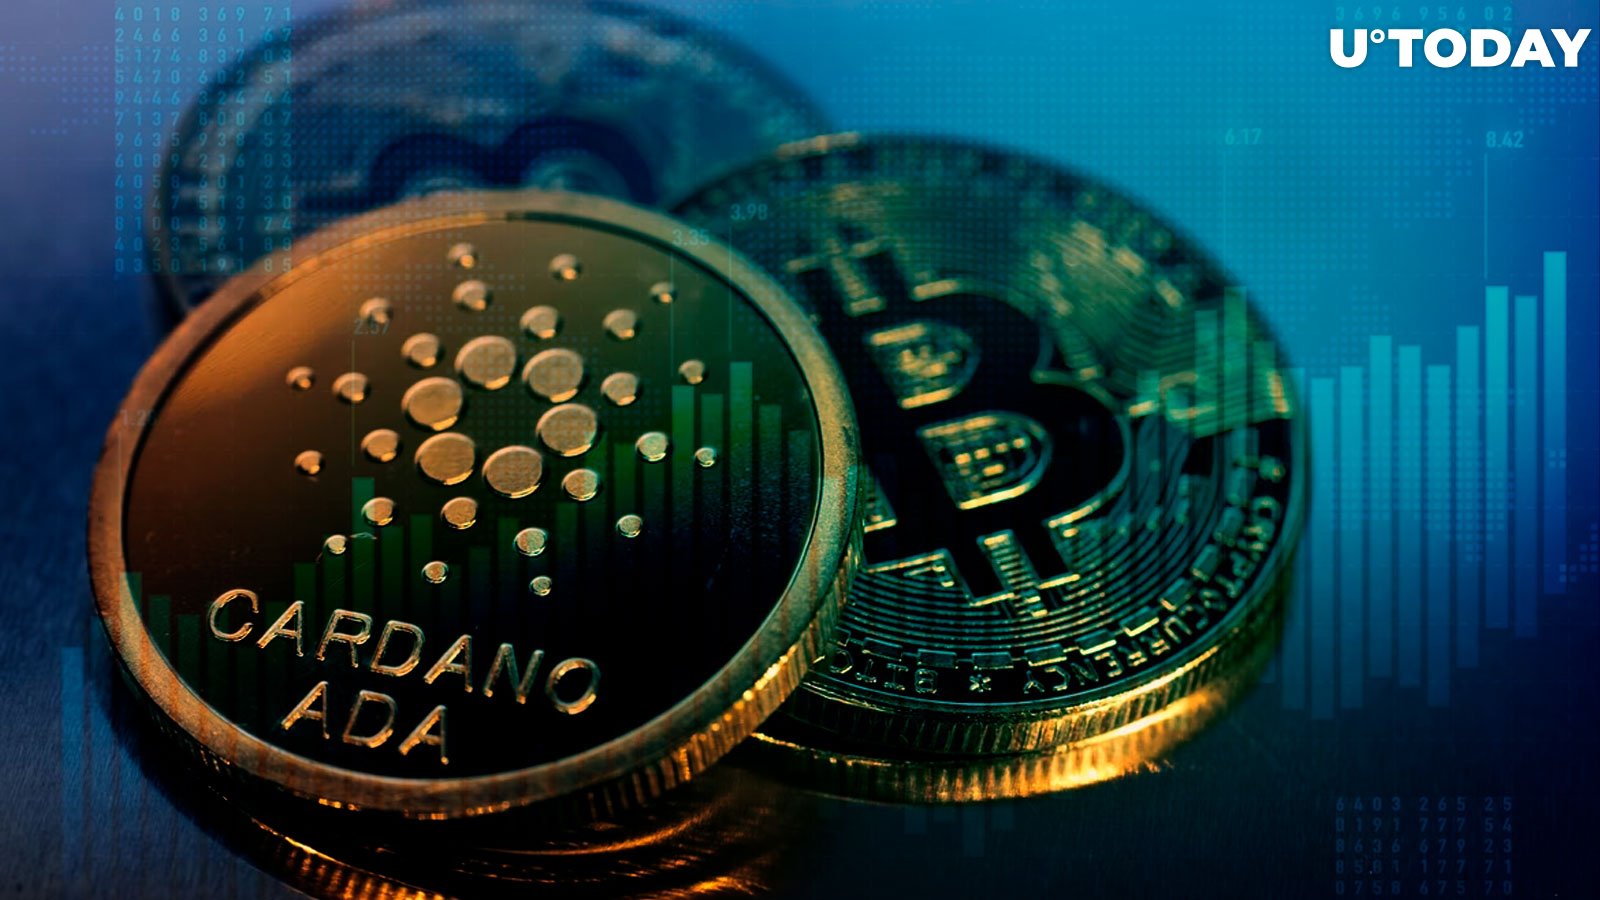 Cardano (ADA) Can Now Be Traded Against Bitcoin (BTC) on Major Crypto Exchange